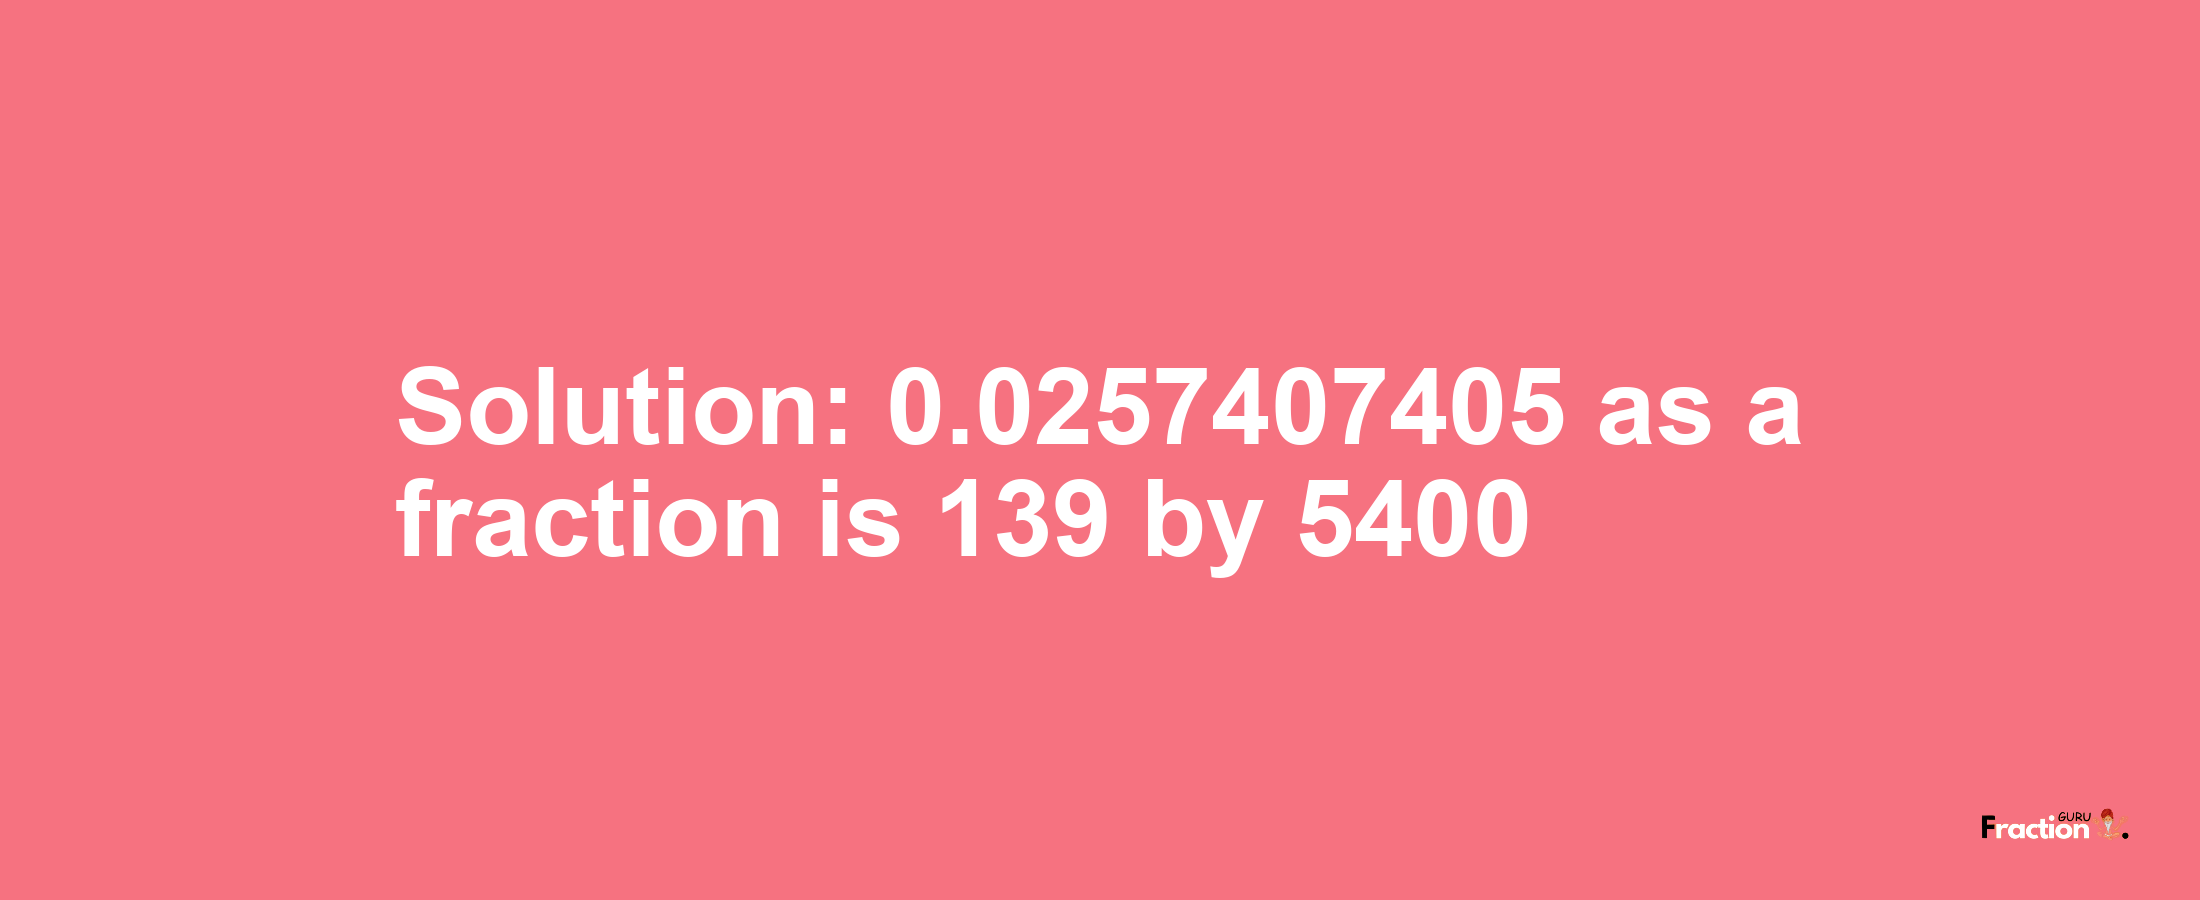 Solution:0.0257407405 as a fraction is 139/5400